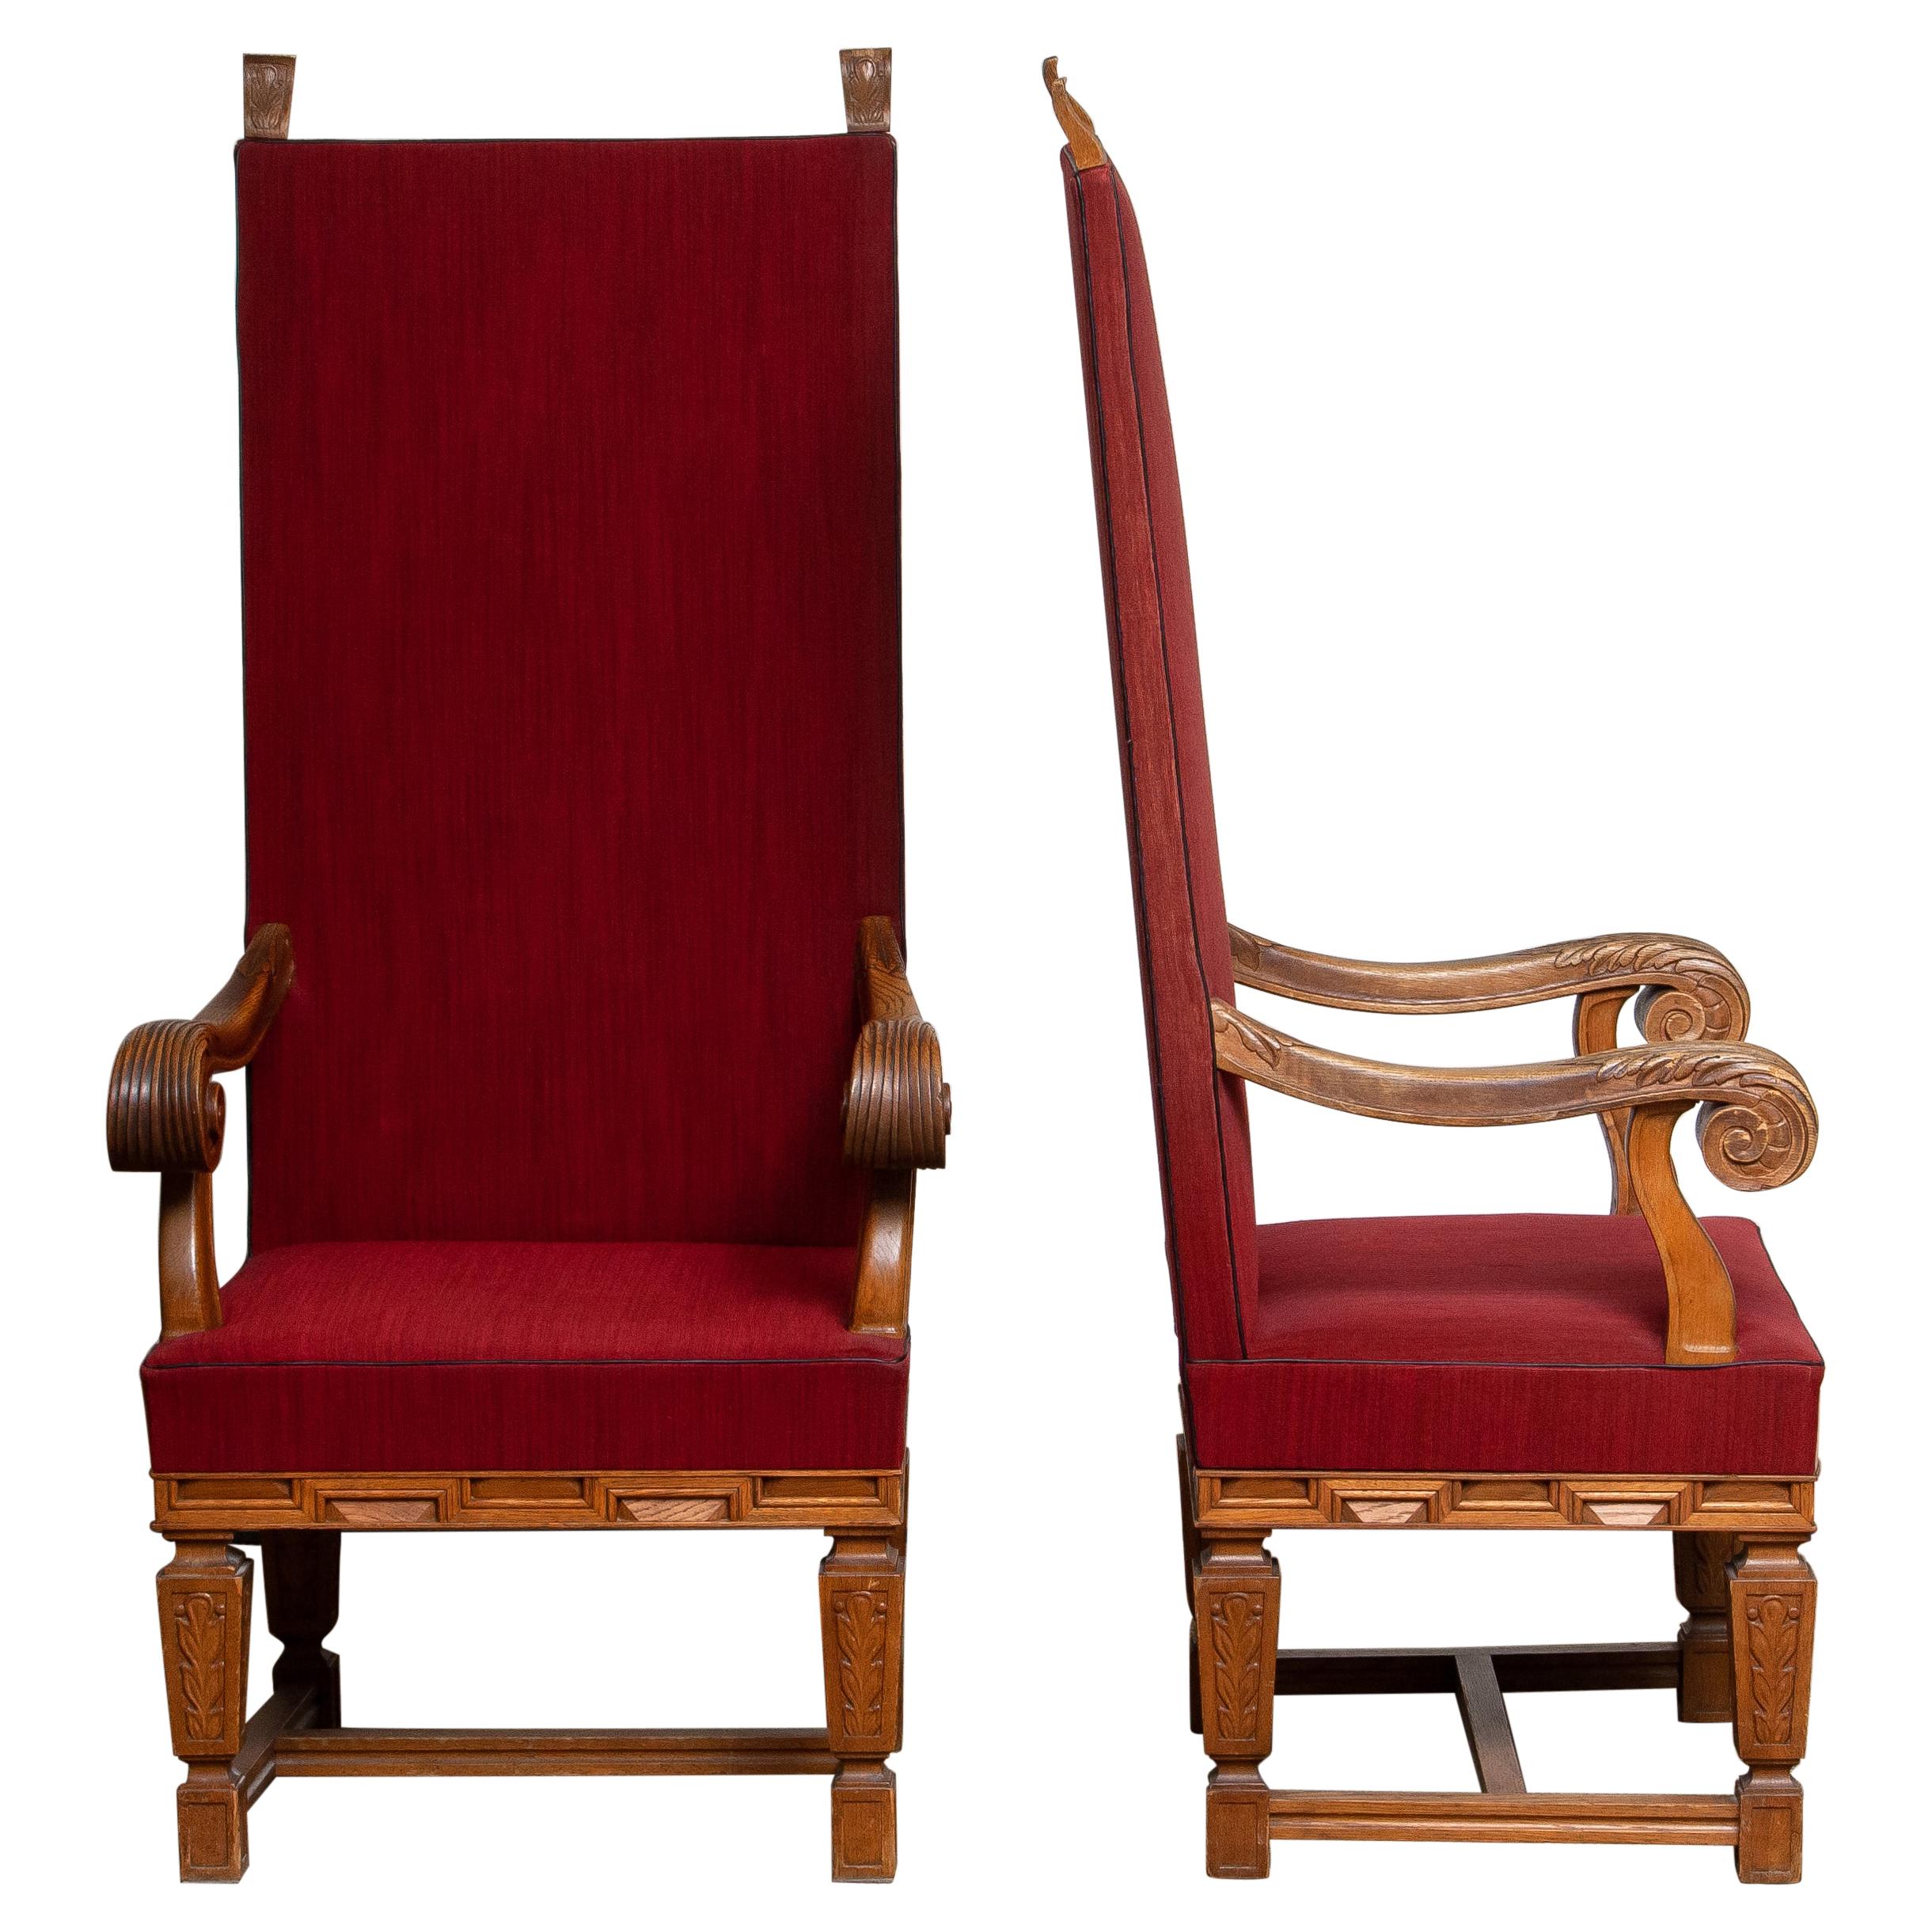 Unique set of two extremely tall throne chairs made of oak with beautiful modest carvings hand made in Sweden between 1900 and 1950's. High quality!
Both chairs are individual numbered as number one and number two.
The height of the backrest,